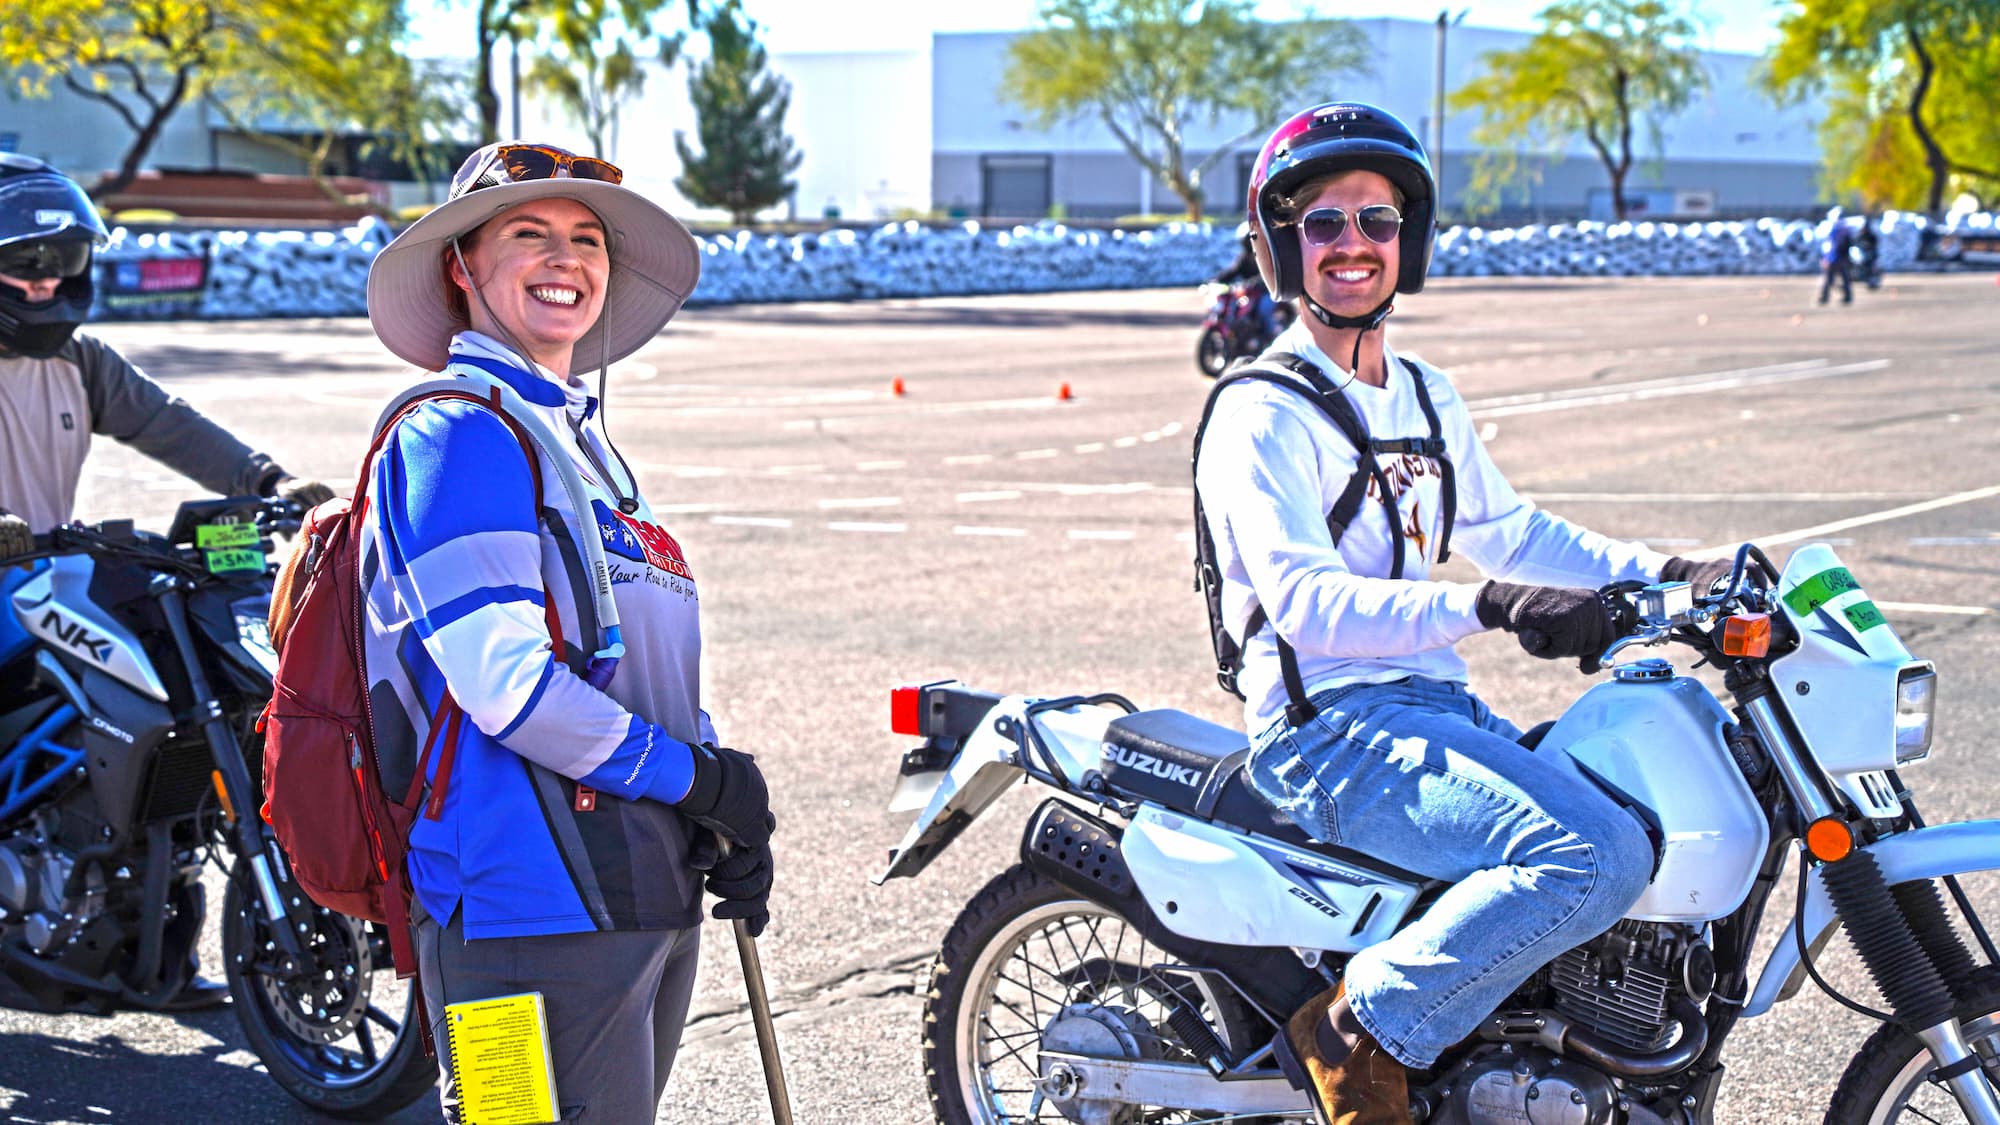 people learning to ride a motorcycle smiling at the camera